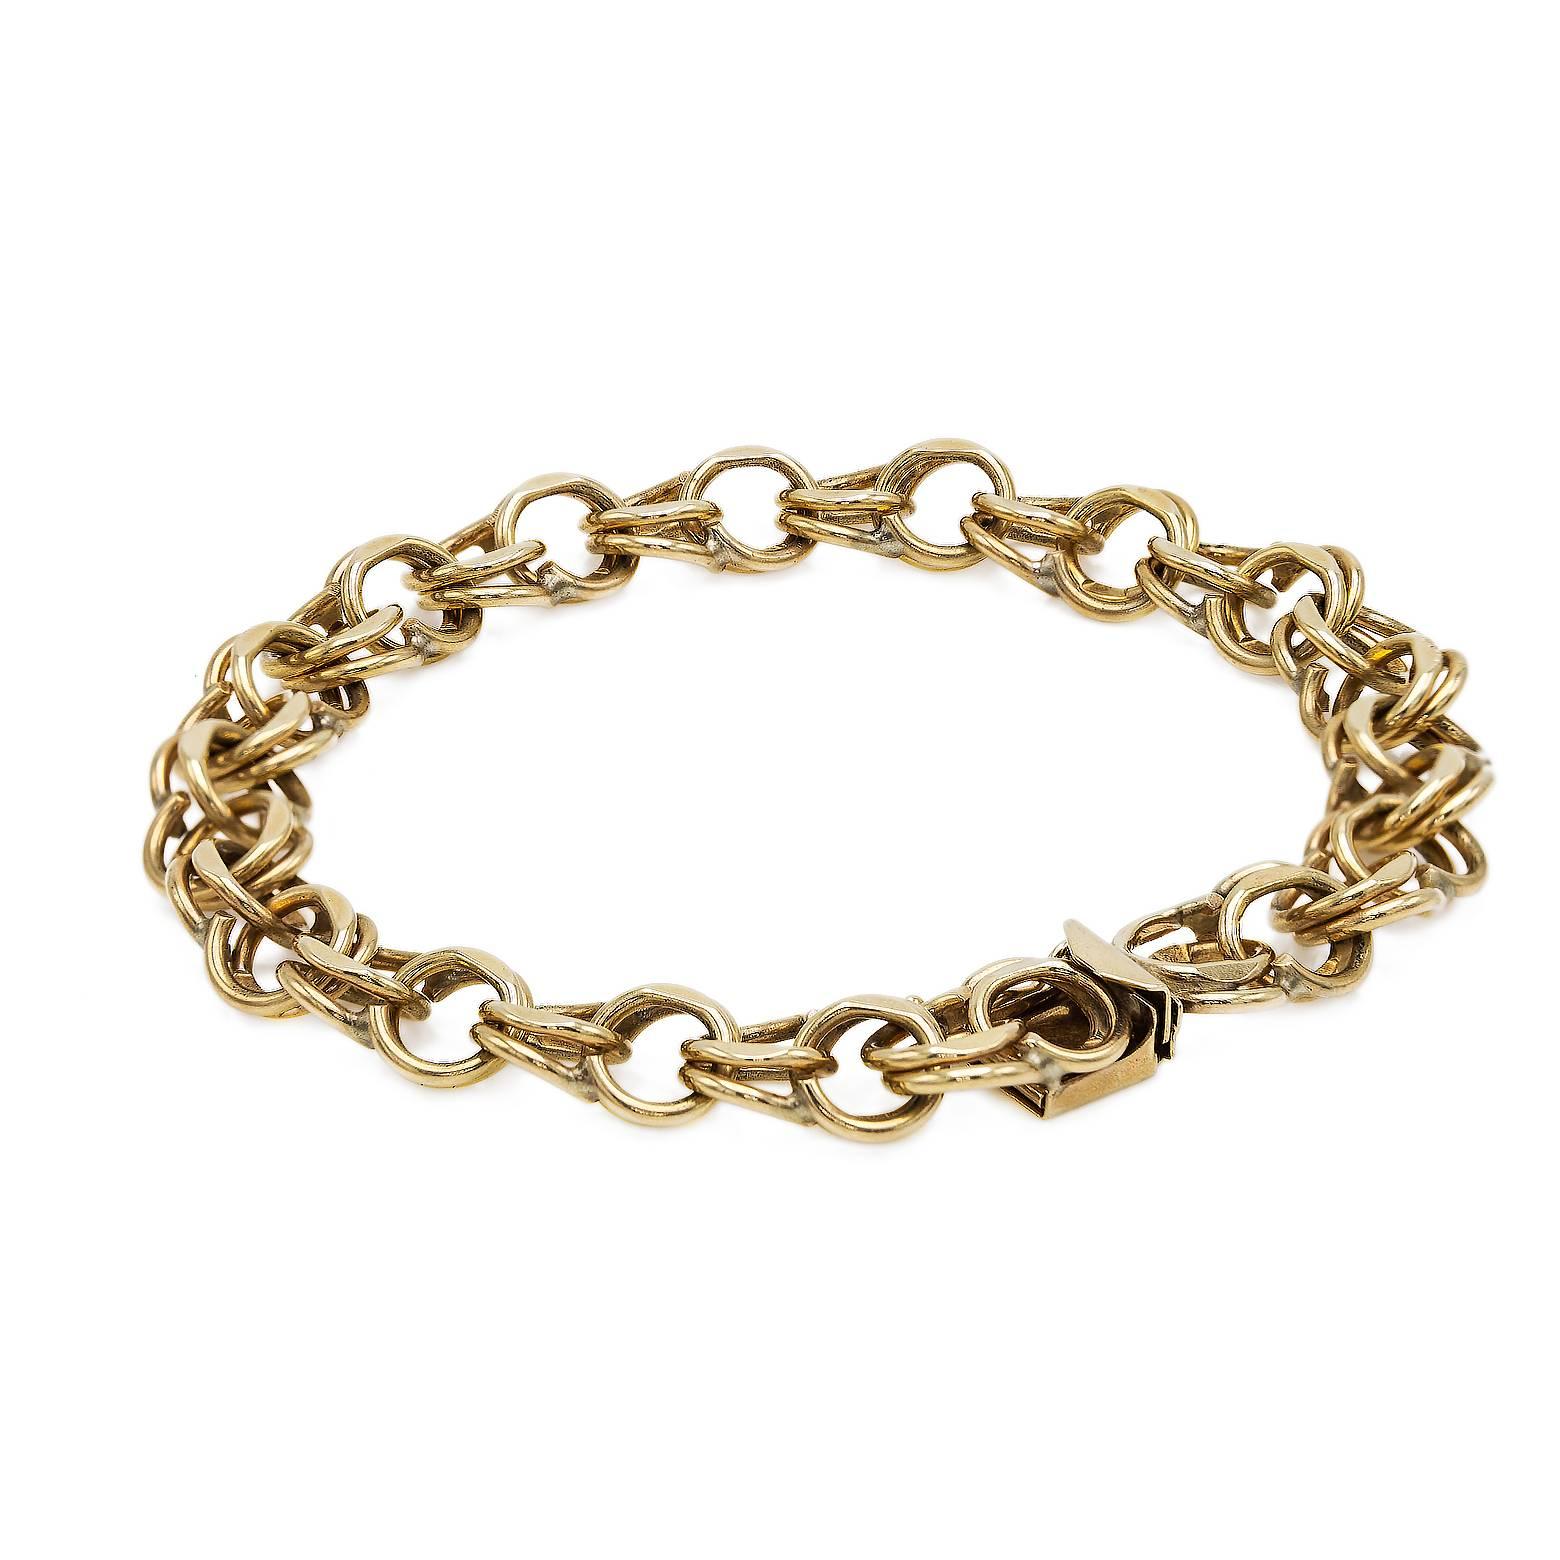 Classic and Chic 14K Yellow Gold Chain Link Bracelet. A must have for any sophisticated jewelry collection. With a substantial weight and an elegant design this bracelet is gorgeous. 